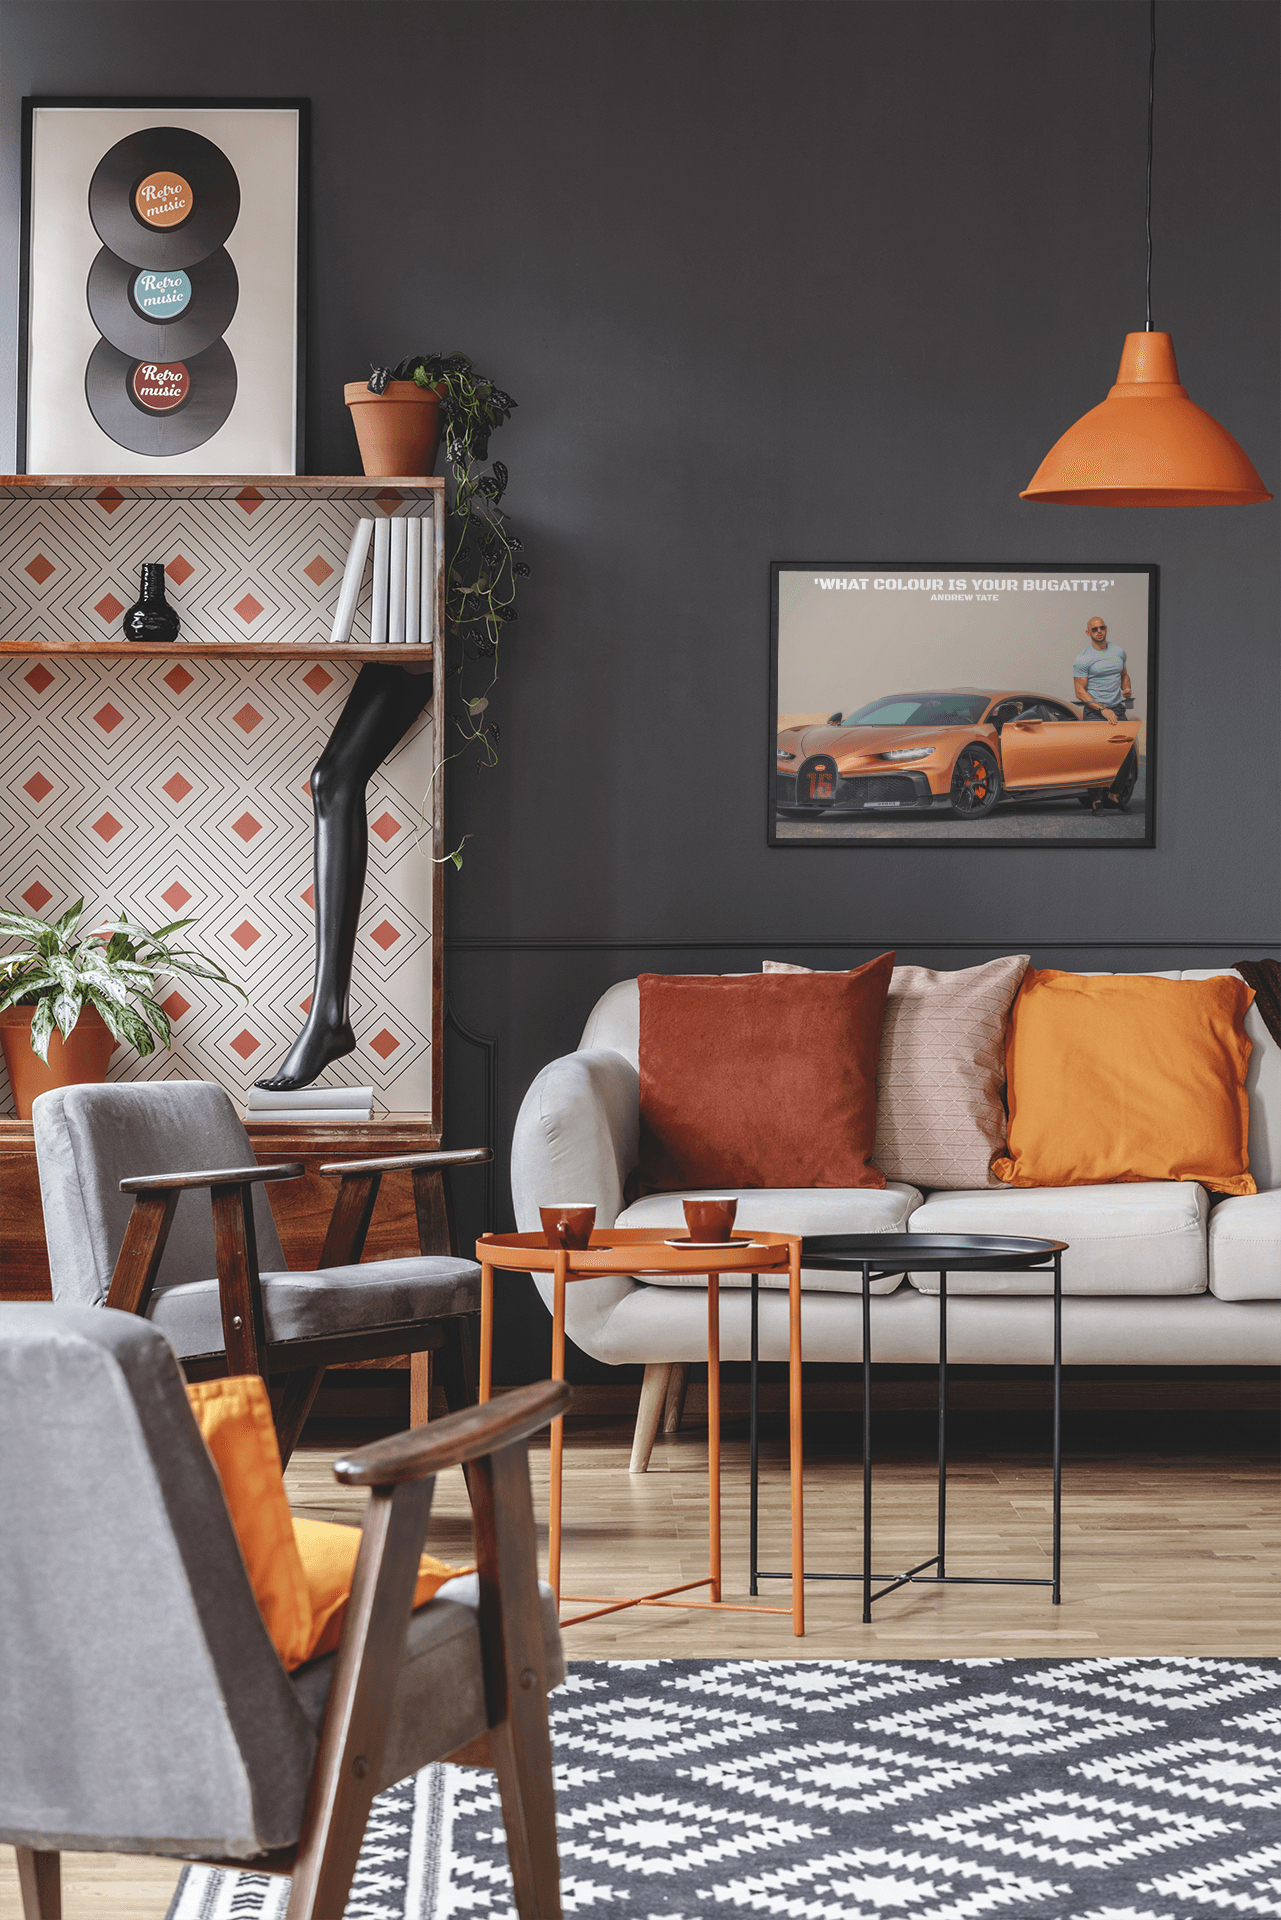 Keep motivated to pursue your dreams with an Andrew Tate poster featuring his Bugatti and the quote 'What colour is your Bugatti?' Choose from a range of sizes and enjoy cheap prices and worldwide delivery.